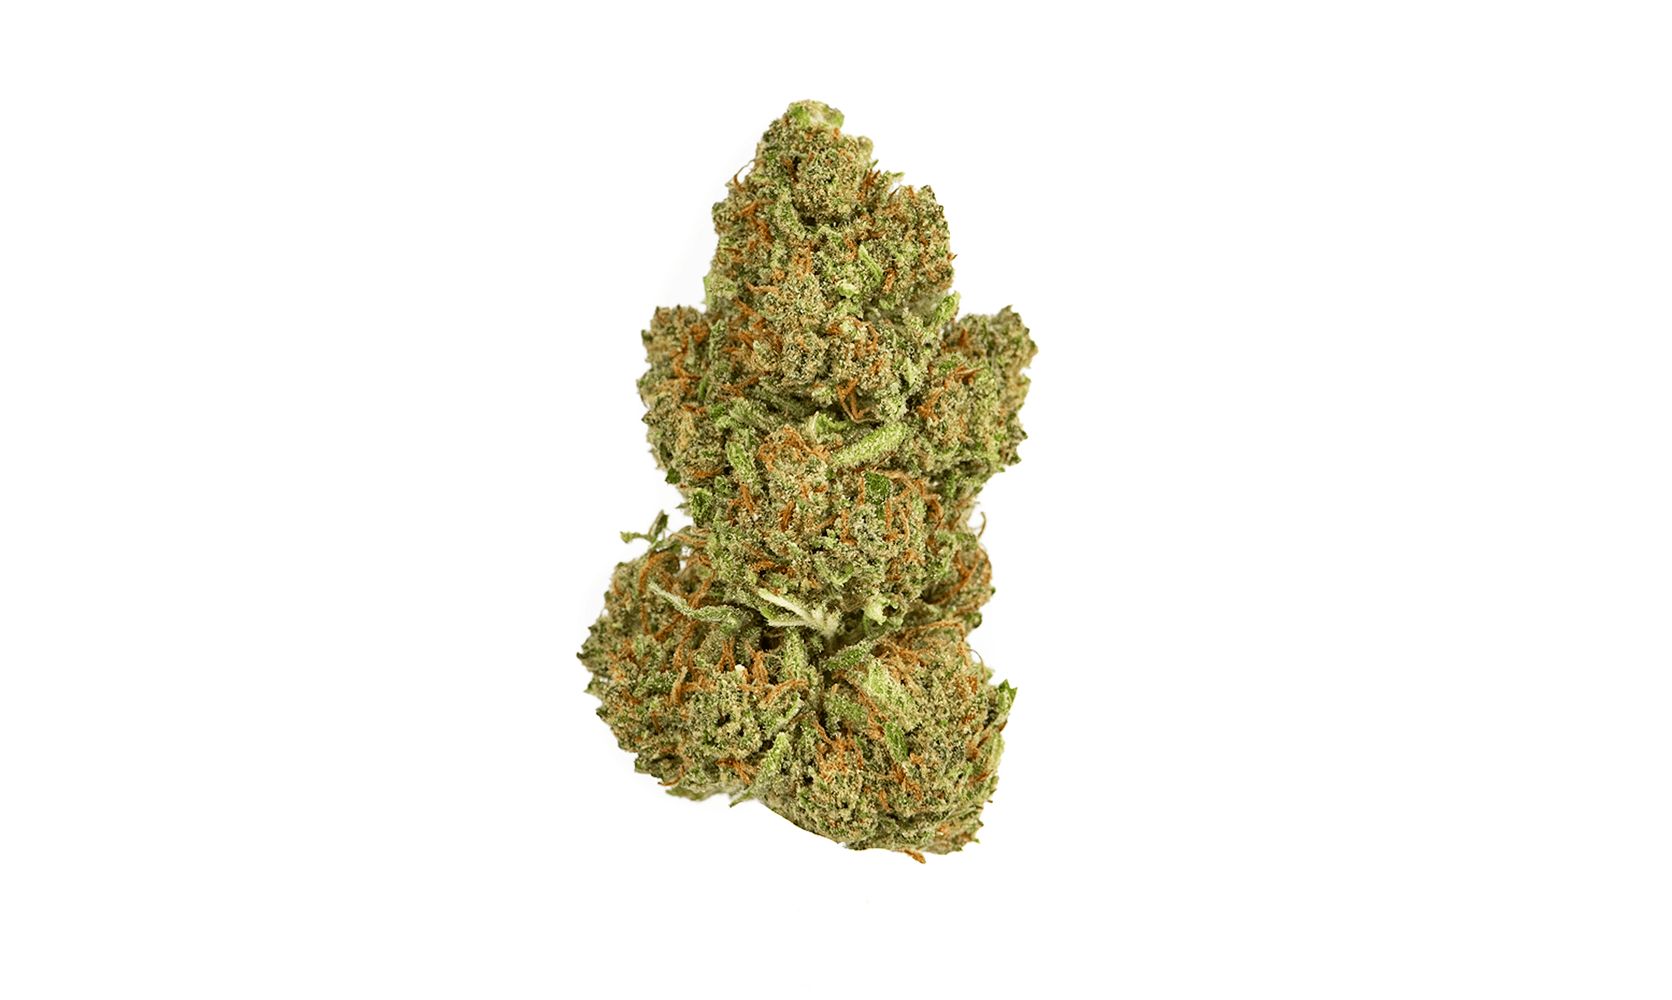 It is time to take the trip to the galaxies unexplored with Northern Lights Strain. Low Price Bud you get the premium bud delivered to your home.